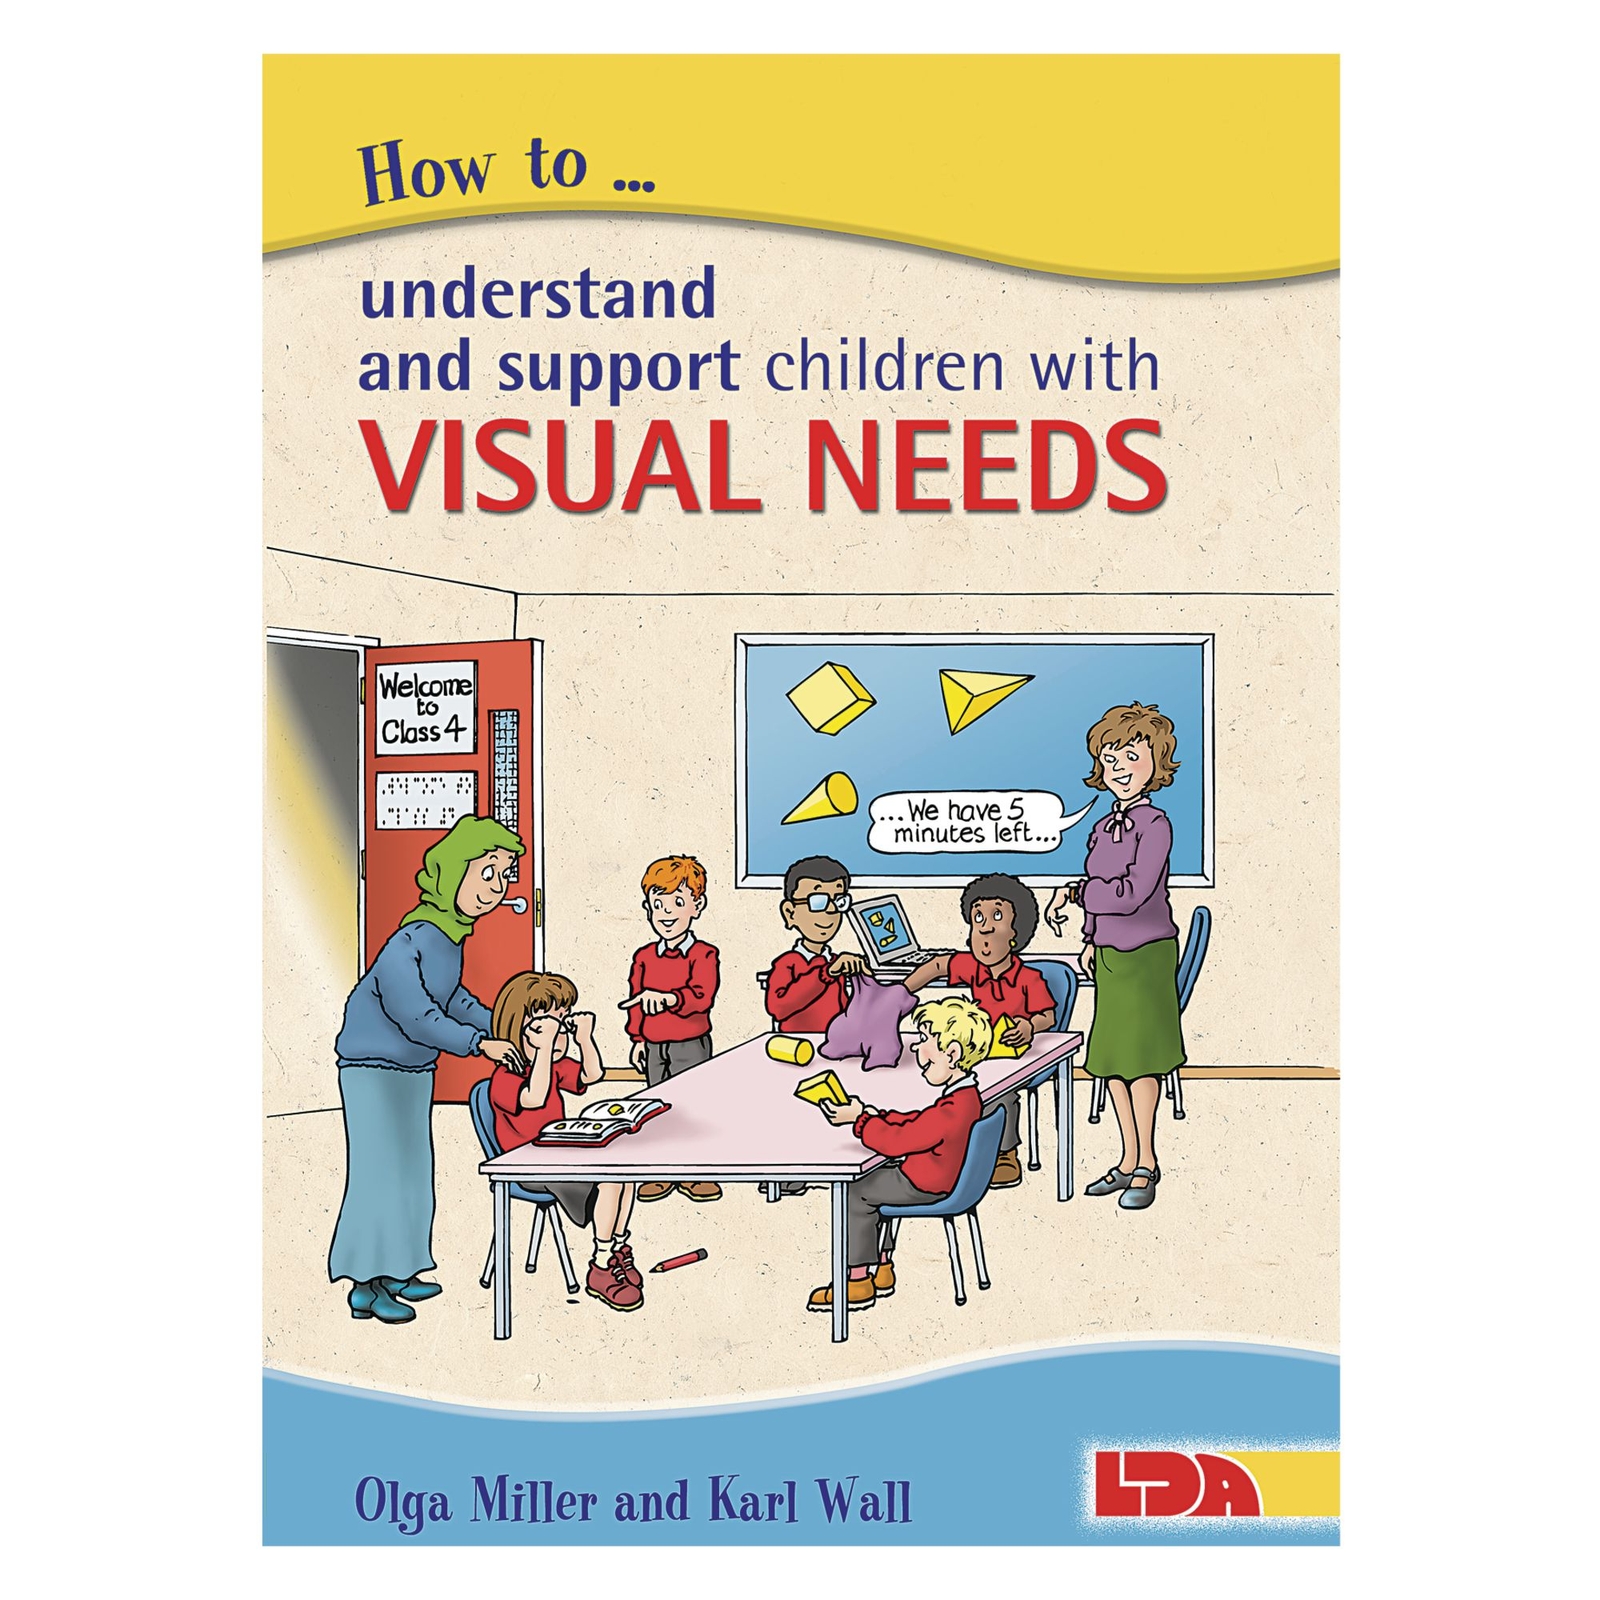 How to Understand and Support Children with Visual Needs